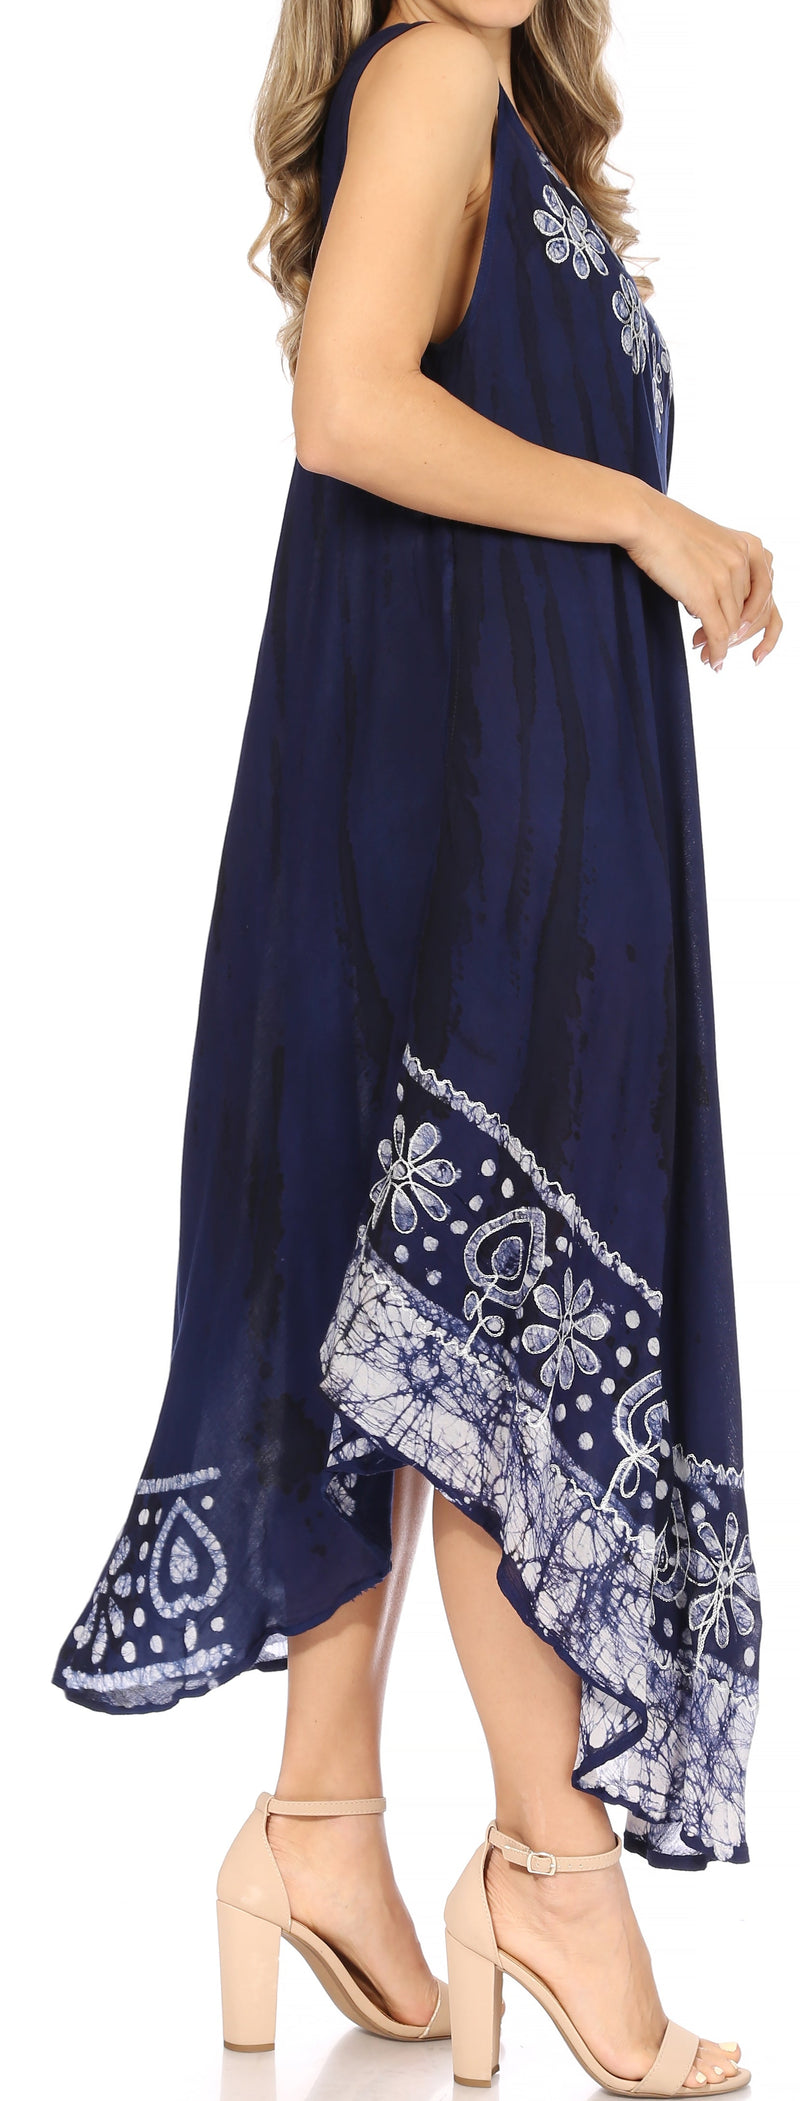 Sakkas Alexis Embroidered Long Sleeveless Floral Caftan Dress / Cover Up